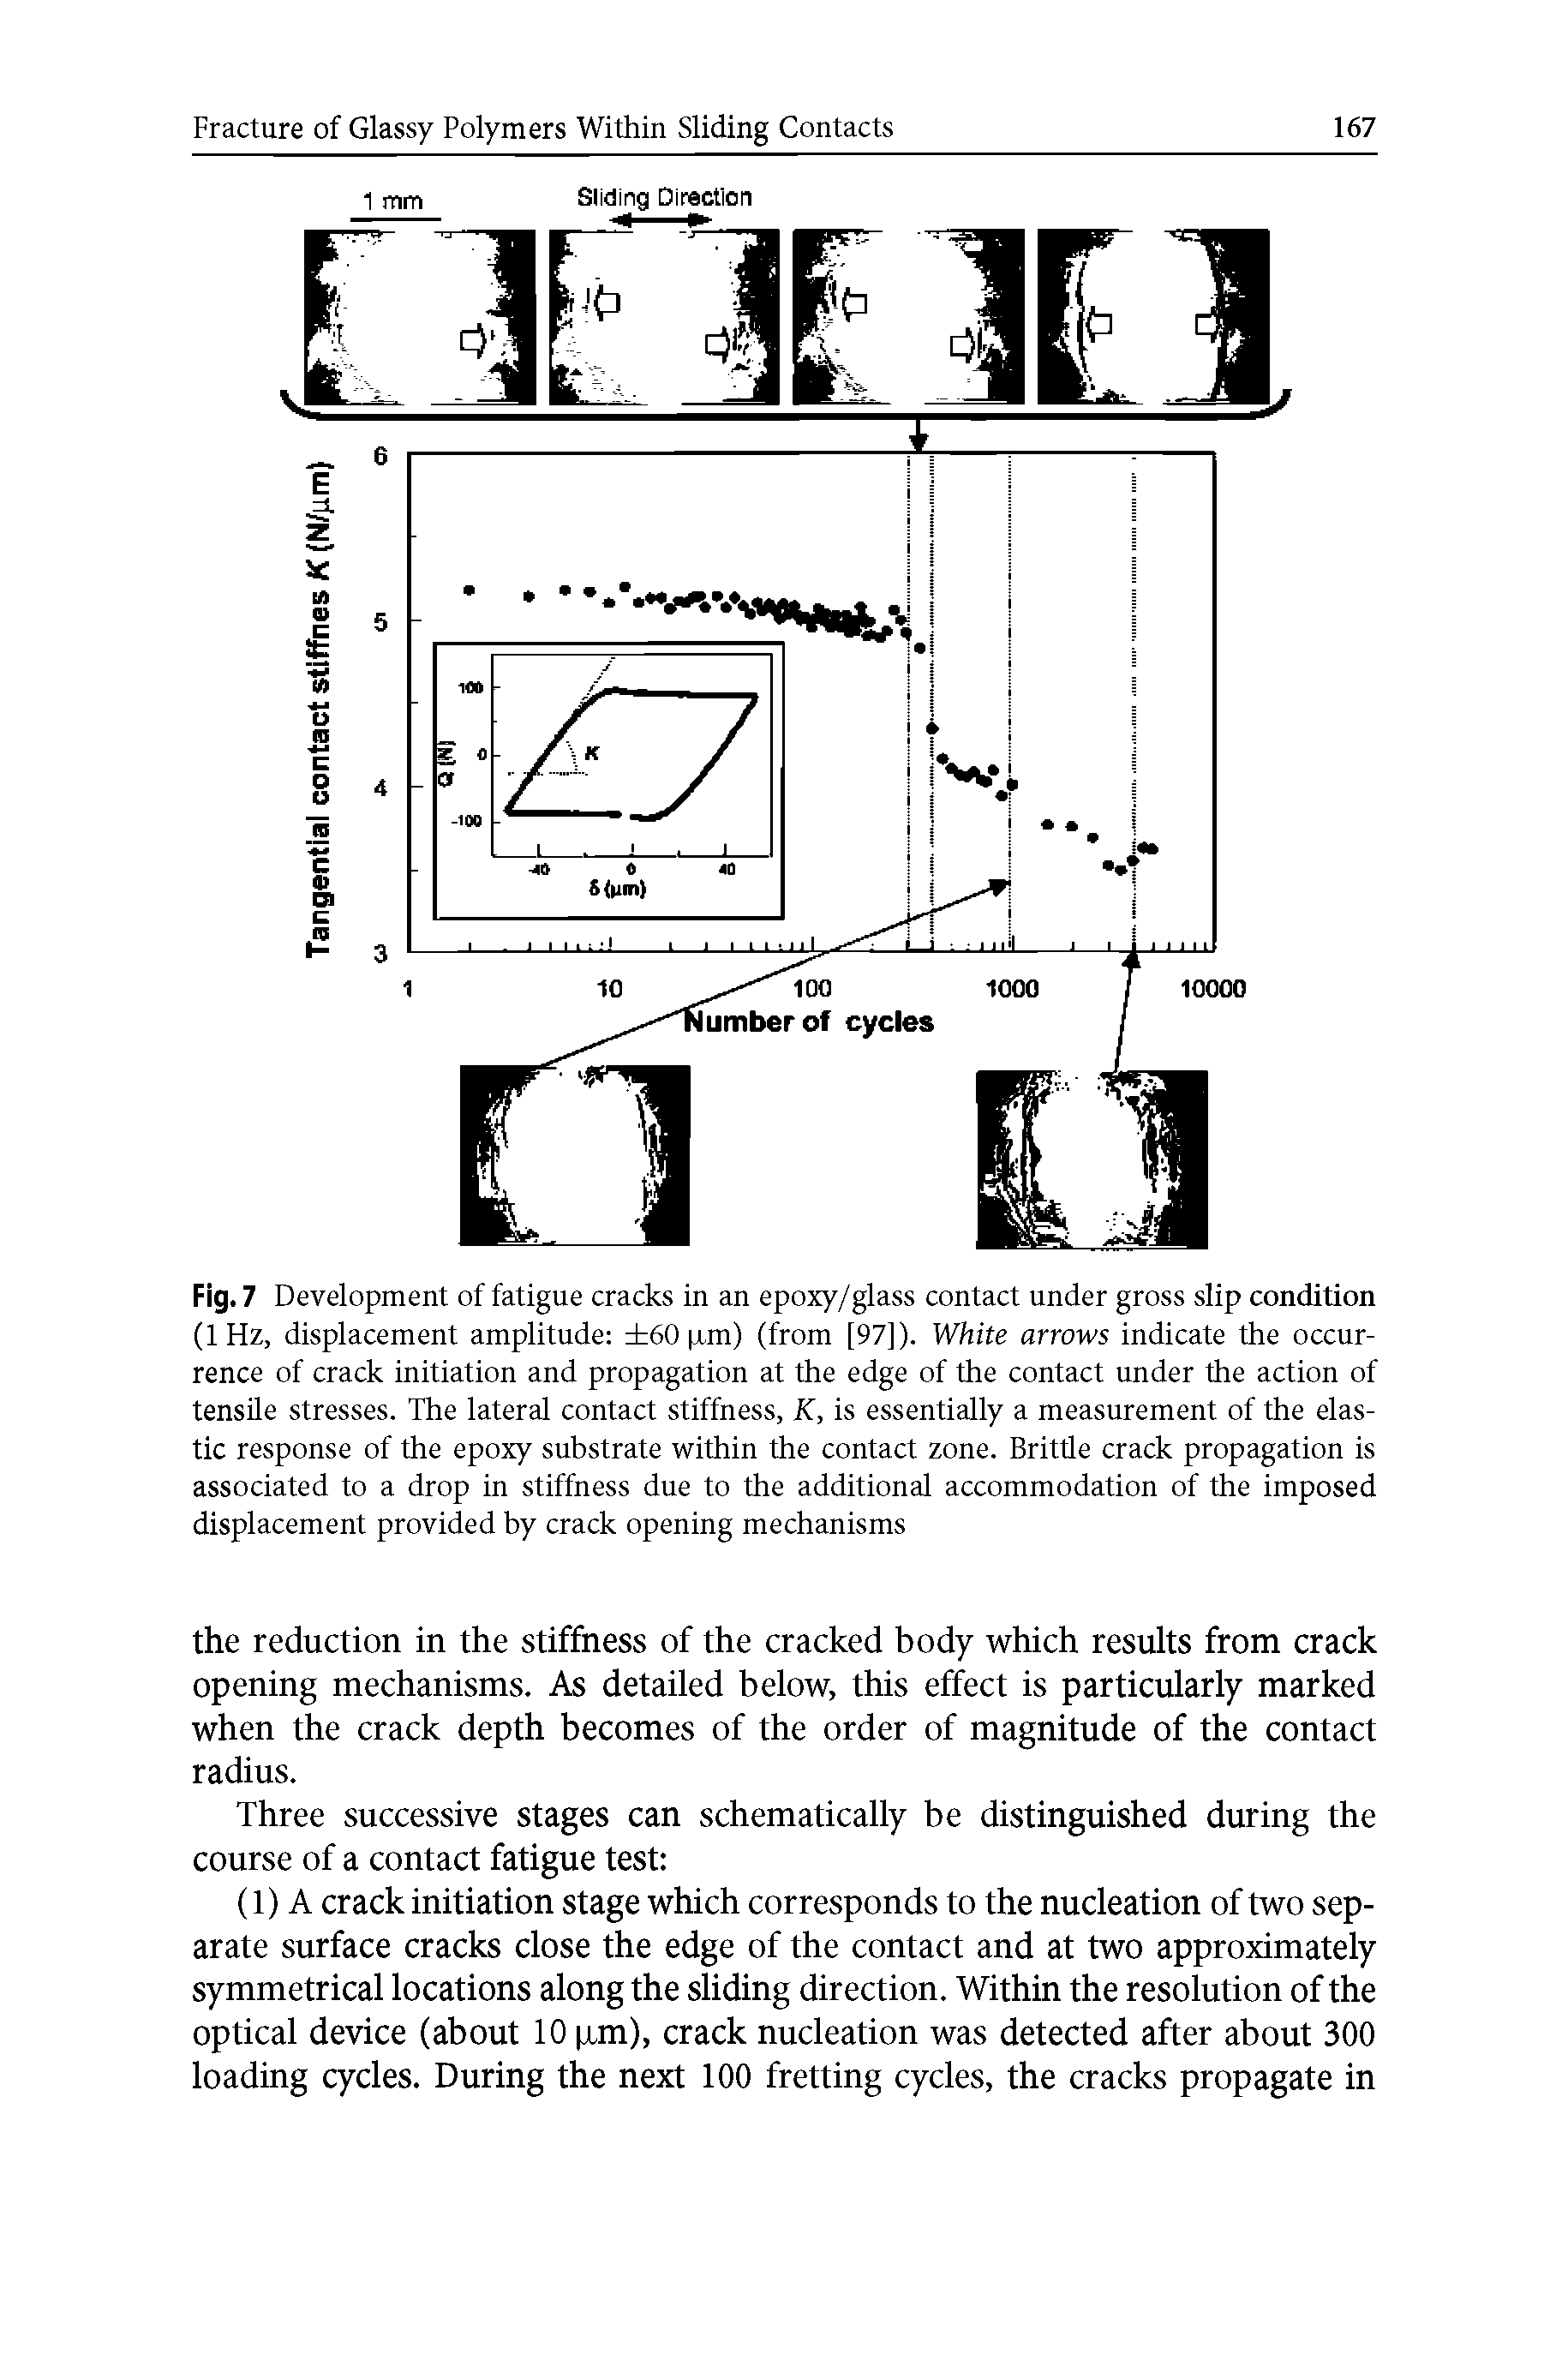 Fig. 7 Development of fatigue cracks in an epoxy/glass contact under gross slip condition (1Hz, displacement amplitude 60 xm) (from [97]). White arrows indicate the occurrence of crack initiation and propagation at the edge of the contact under the action of tensile stresses. The lateral contact stiffness, K, is essentially a measurement of the elastic response of the epoxy substrate within the contact zone. Brittle crack propagation is associated to a drop in stiffness due to the additional accommodation of the imposed displacement provided by crack opening mechanisms...